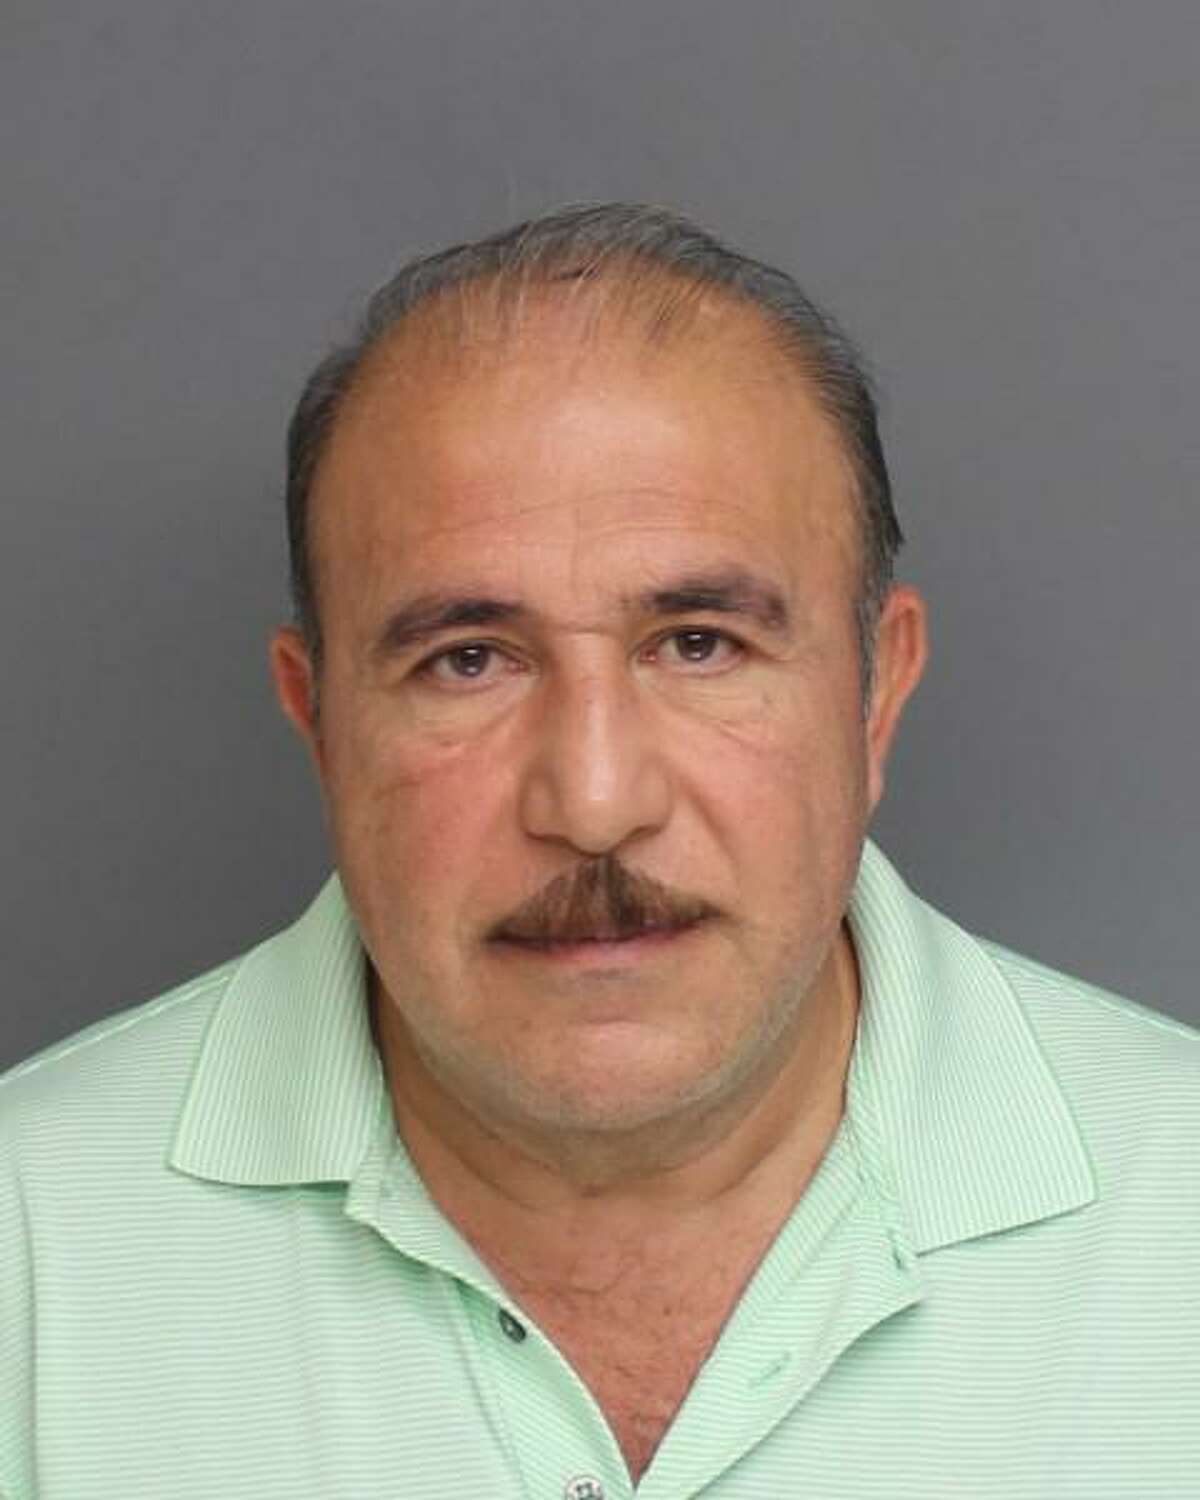 Hennawi Salem, 59, owner of Salem Furniture on Porter Street, is charged with two counts of third-degree sexual assault, two counts of fourth-degree sexual assault, two counts of disorderly conduct and one count of risk of injury to a child.